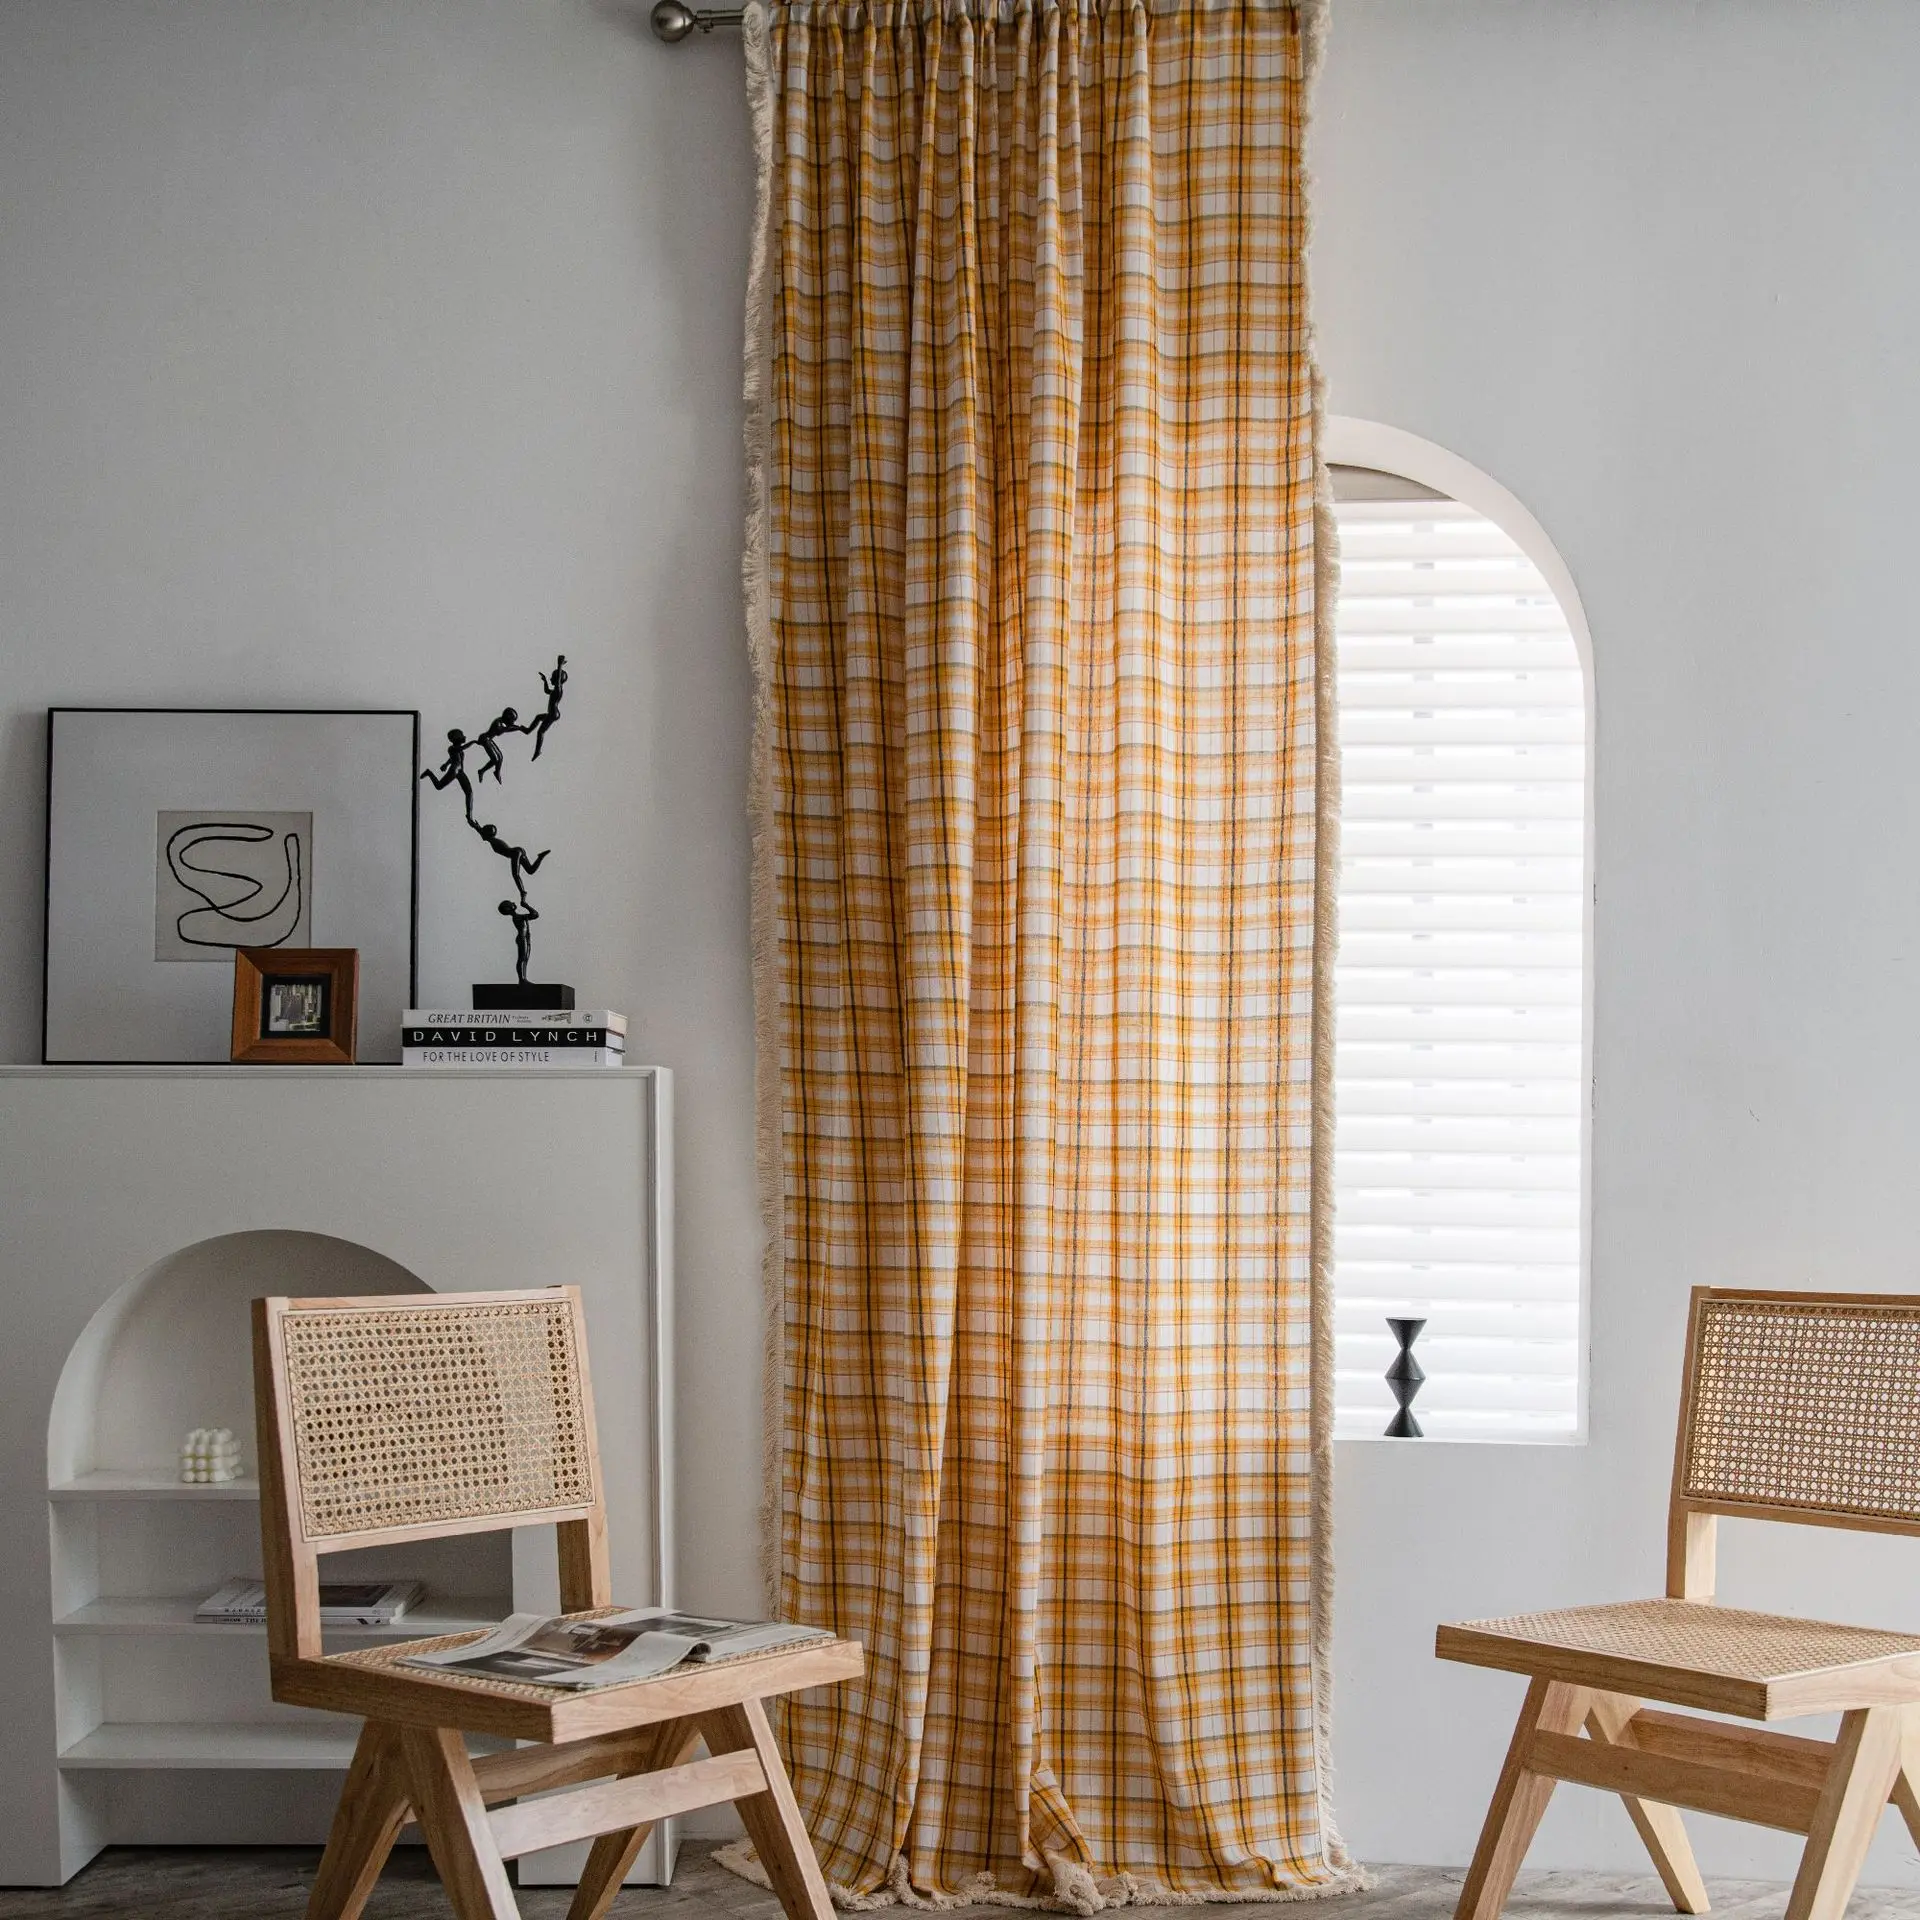 

Plaid Curtains Pom Window Rustic Farmhouse Gingham Semi Taupe White Rod Pocket Natural Linen Light Filtering Transparent Curtain